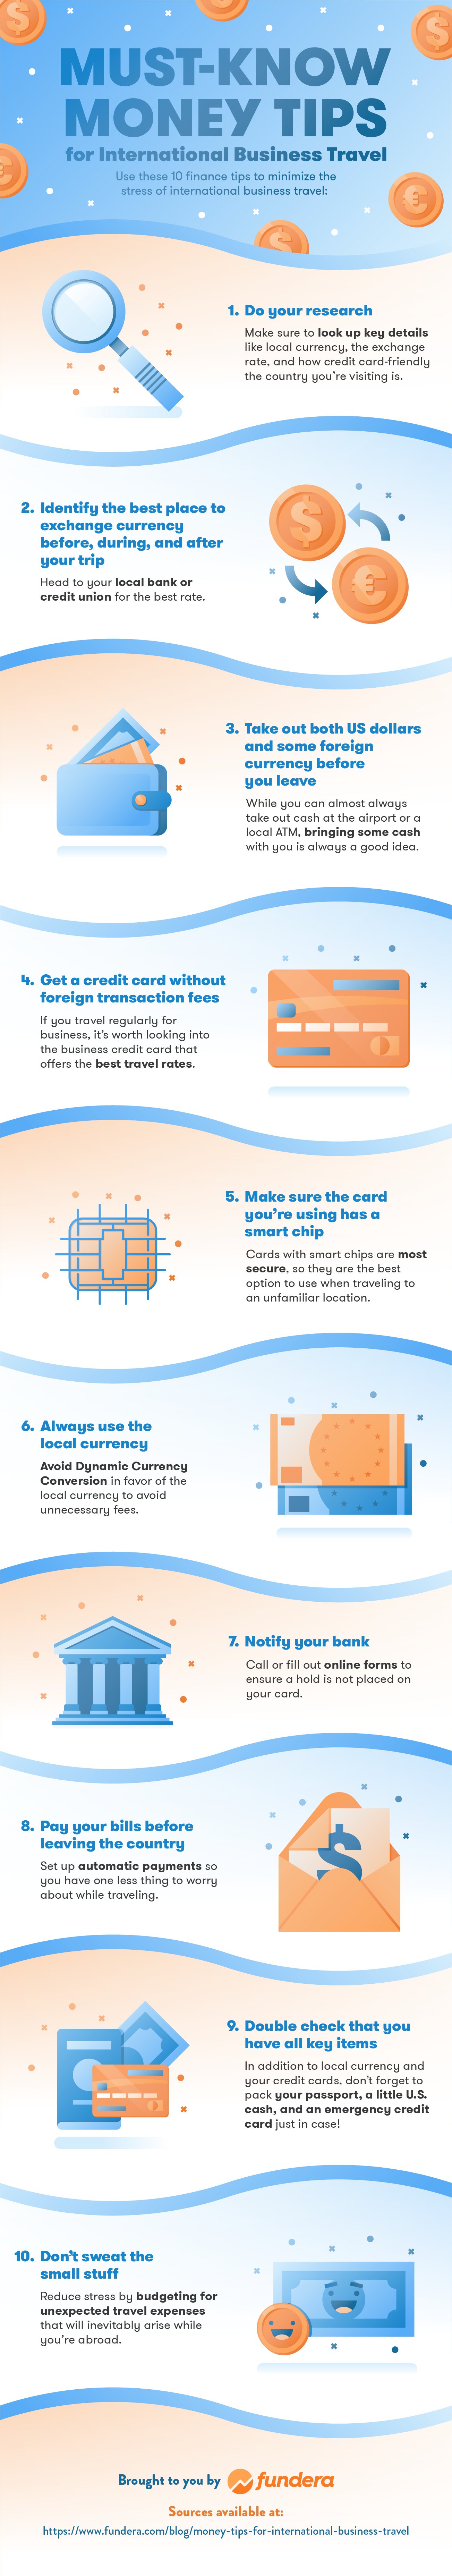 Where to Exchange Currency and Other Must-Know Money Tips for International Business Travelers - #infographic